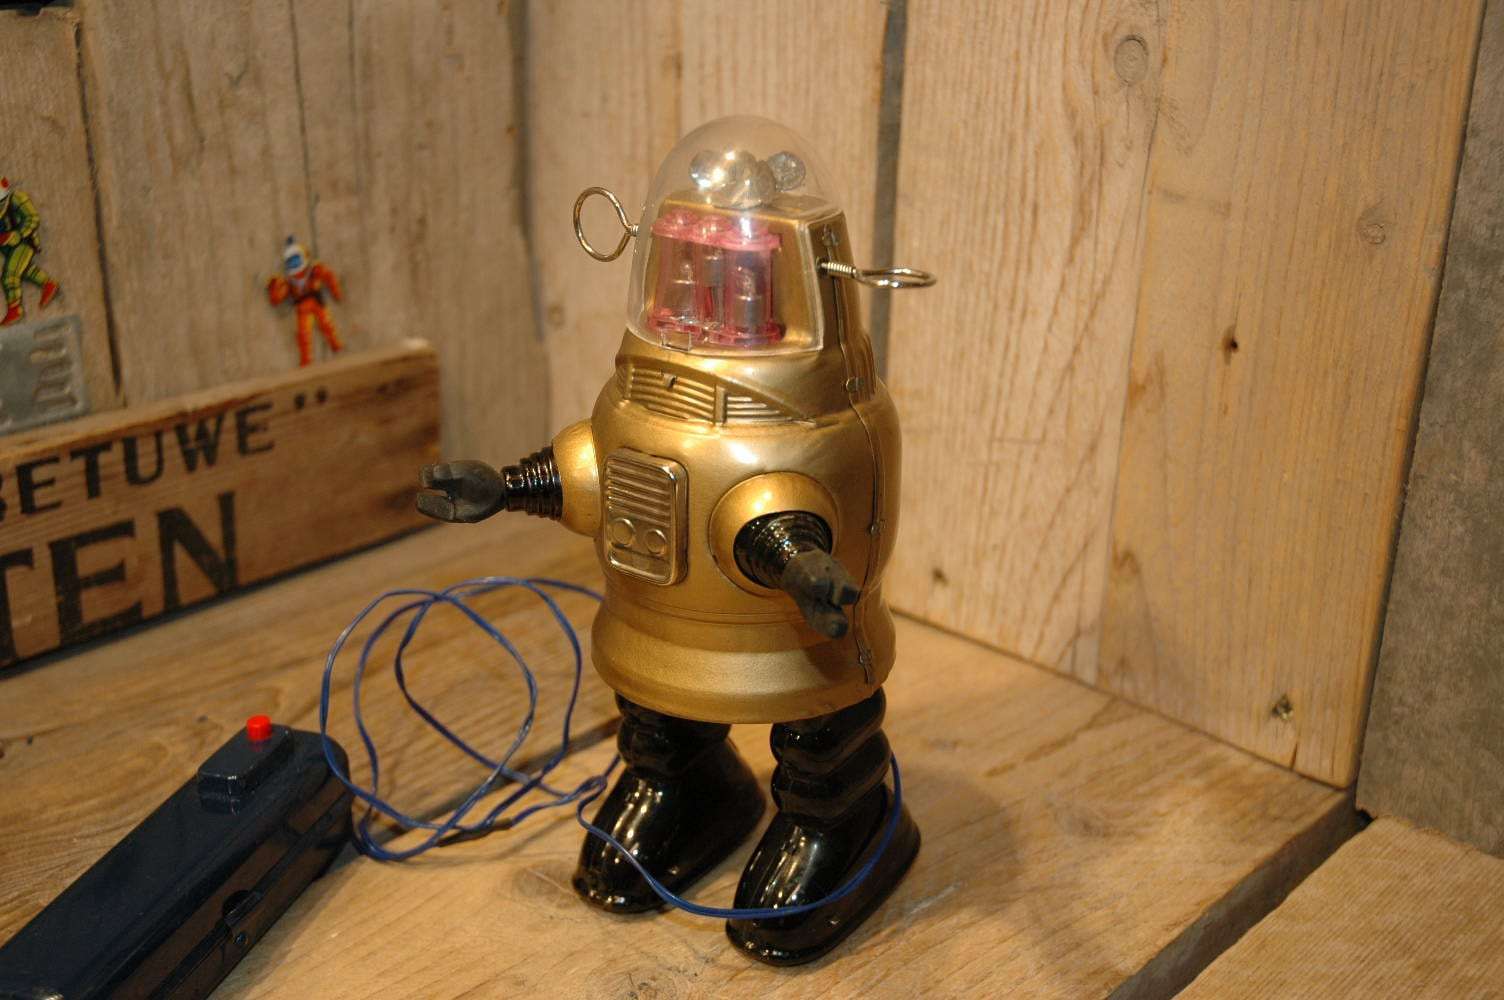 Nomura - Golden Pug Robby Robot with Black legs and straight antenna